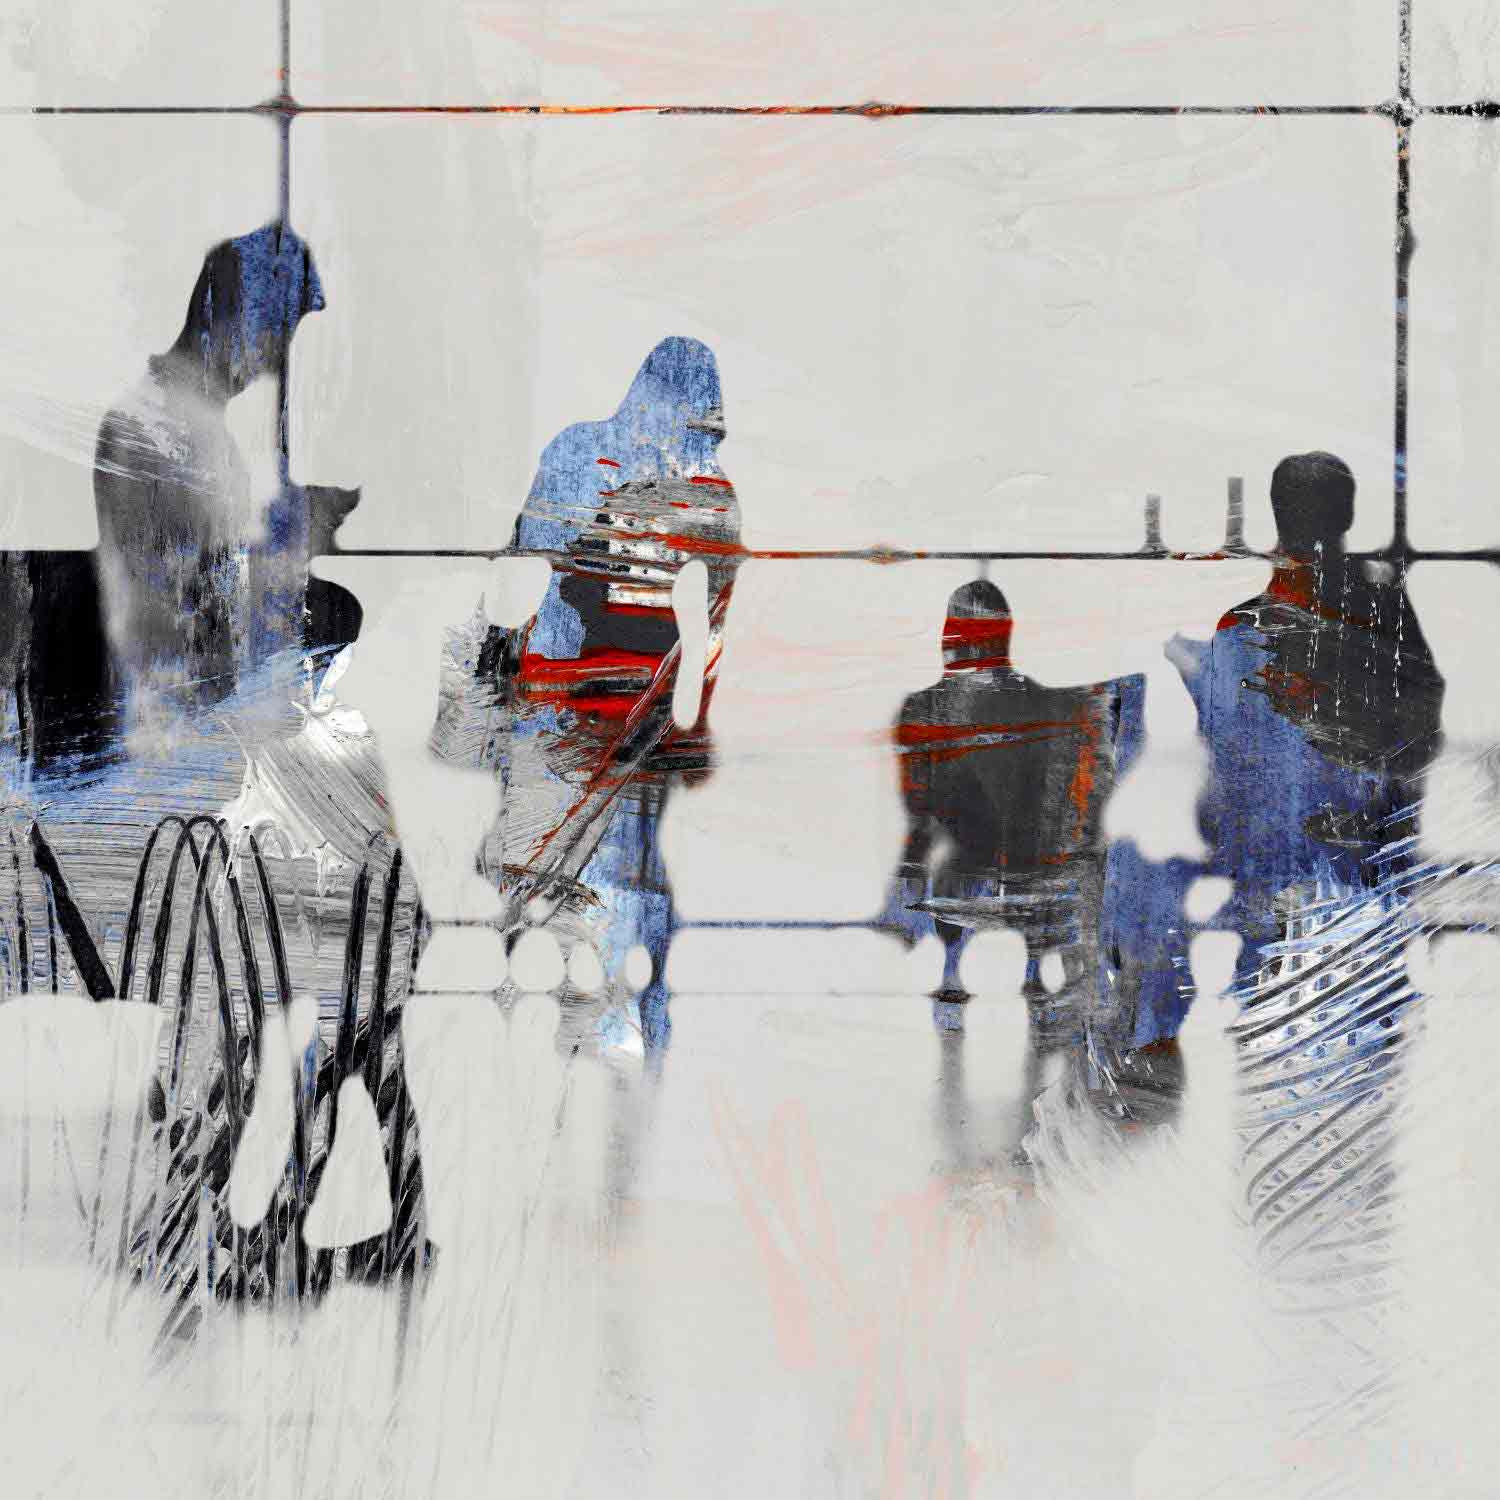 Sven Pfrommer, Airport XXXI, edition - Artalistic online contemporary art buying and selling gallery